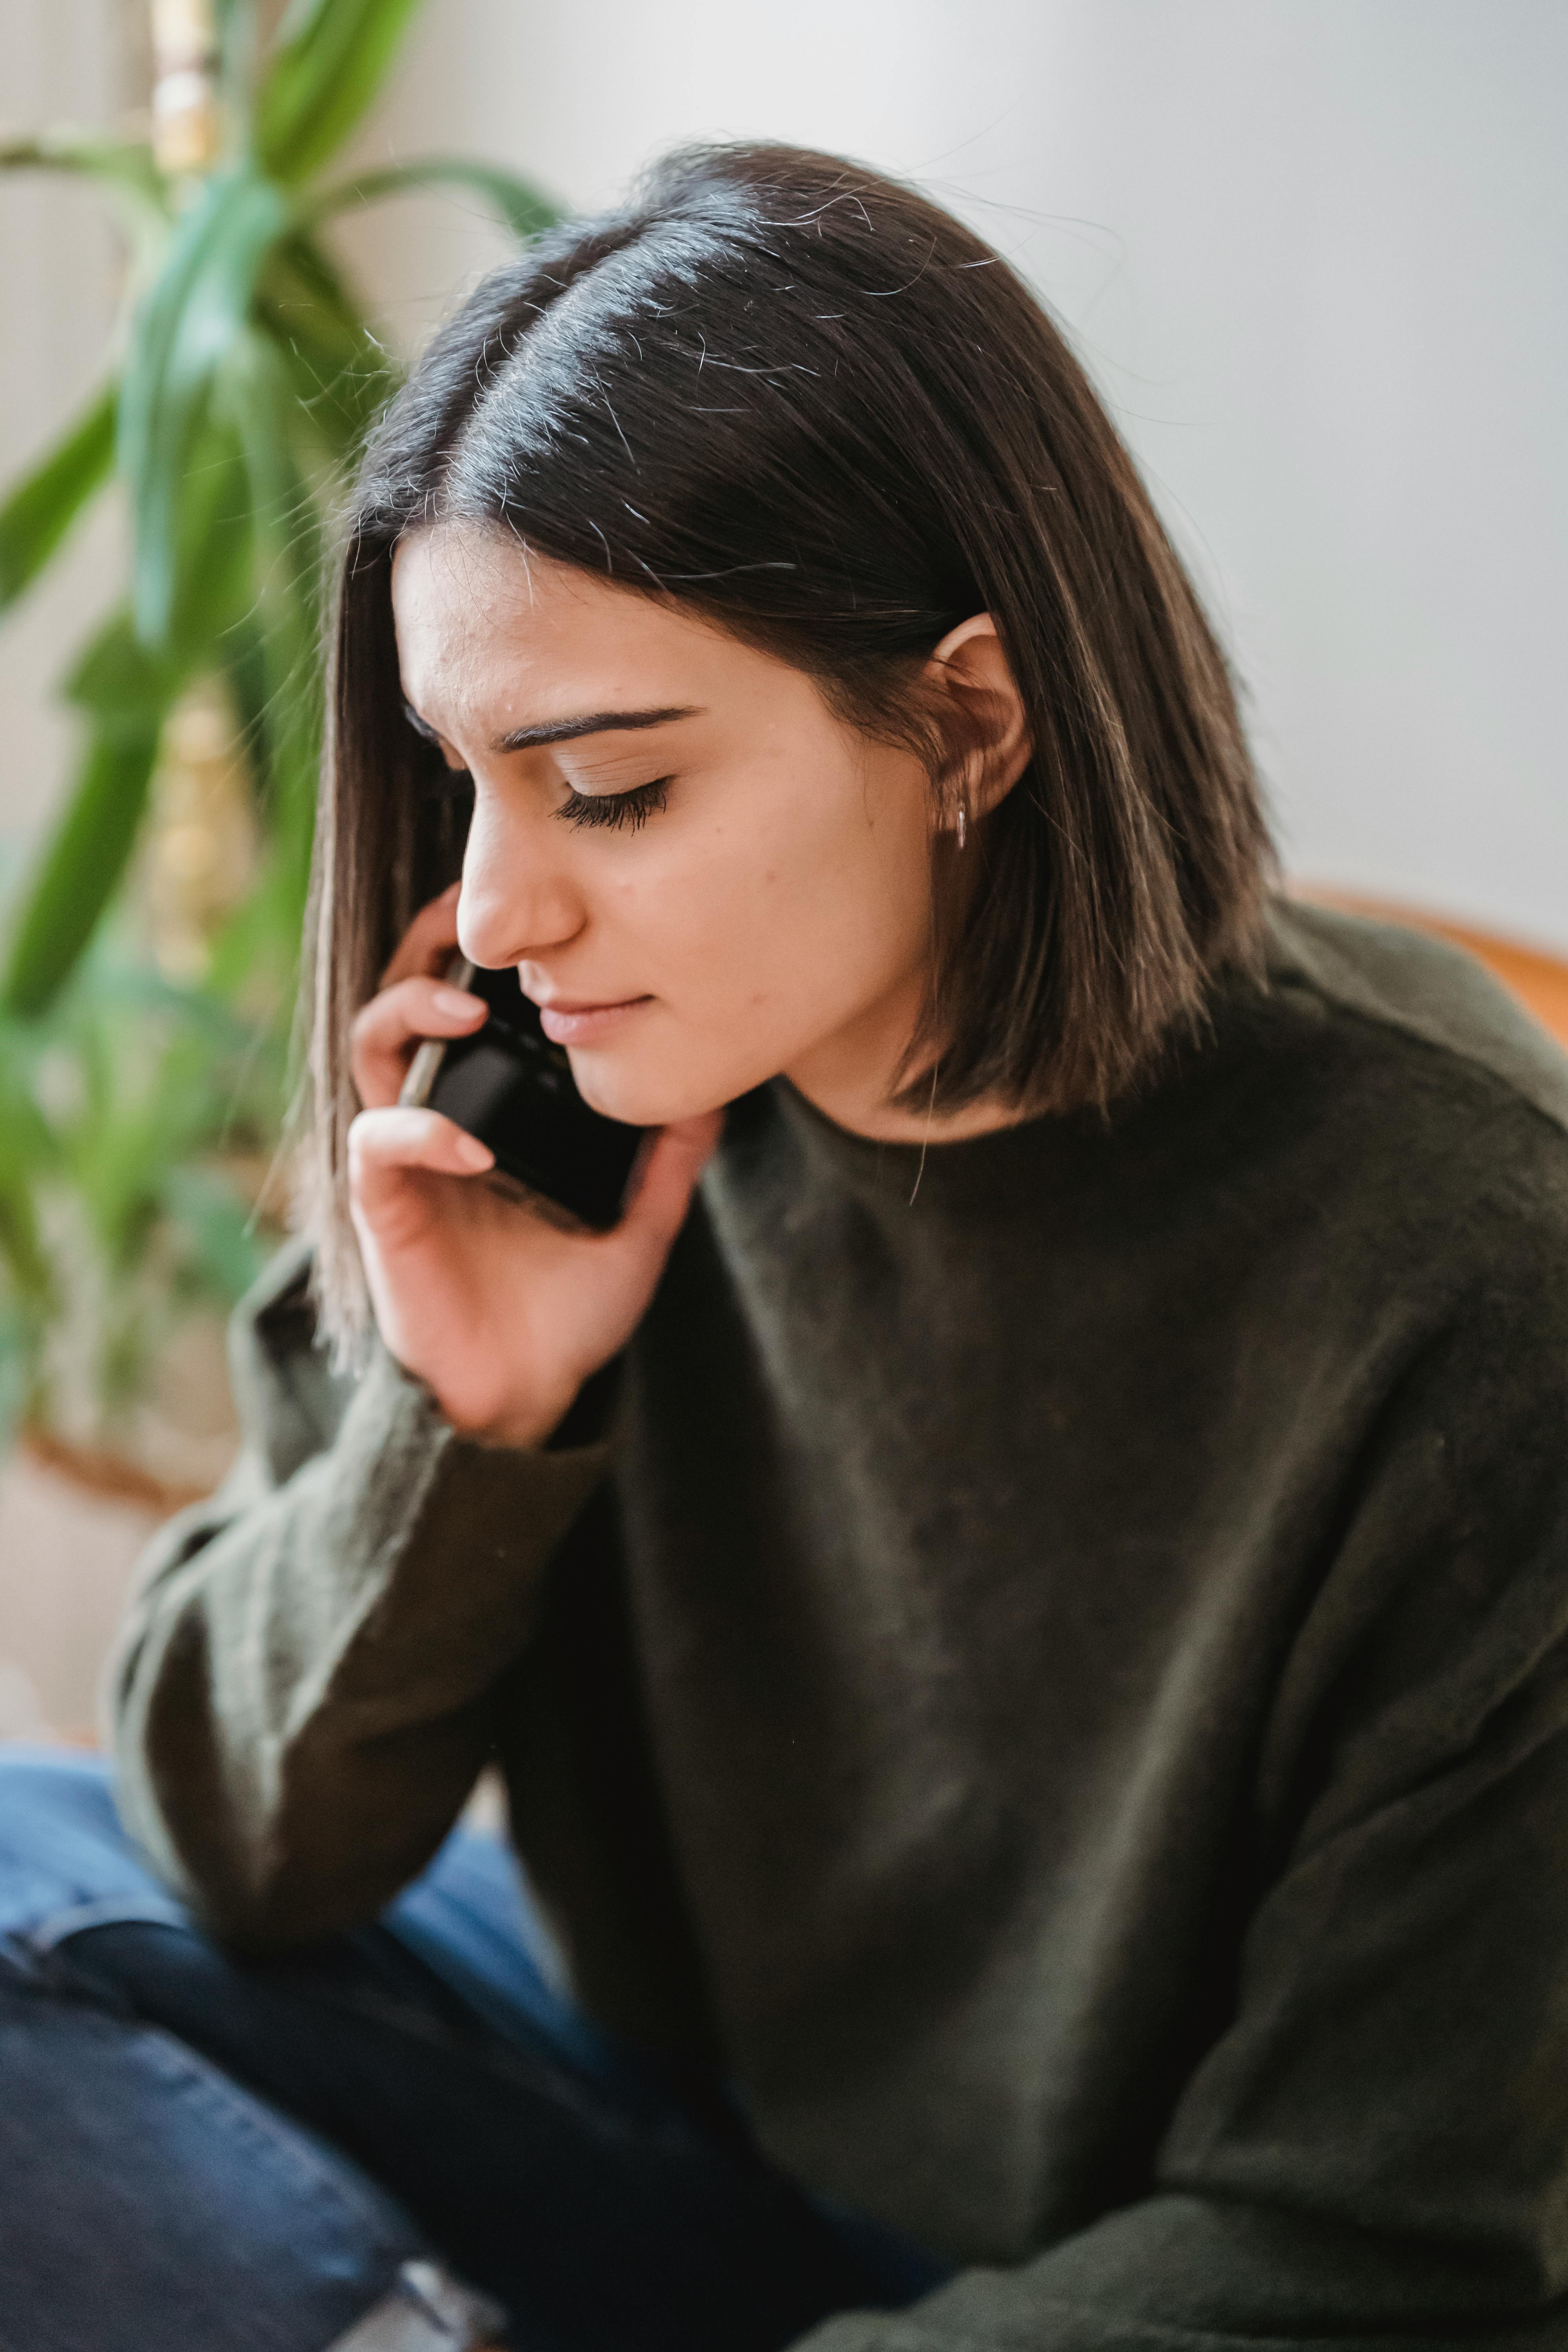 A sad woman speaking on call | Source: Pexels